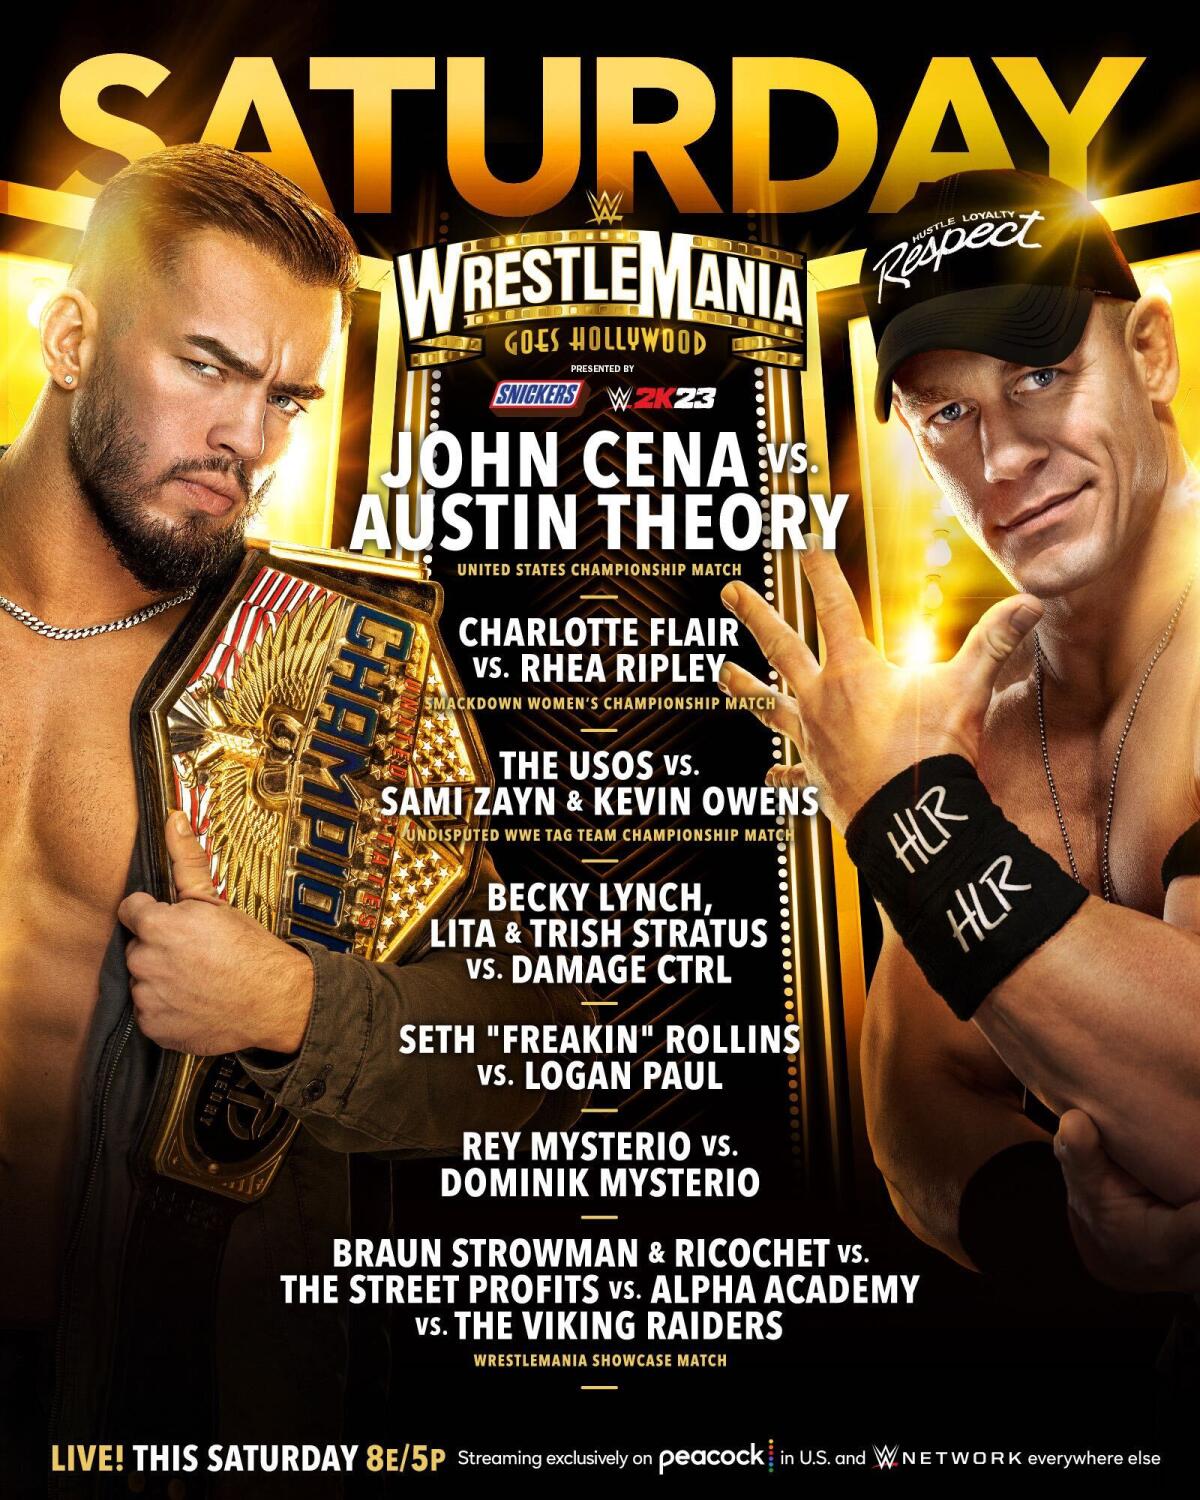 Here's The Full WWE WrestleMania 39 Day 1 and 2 Lineups